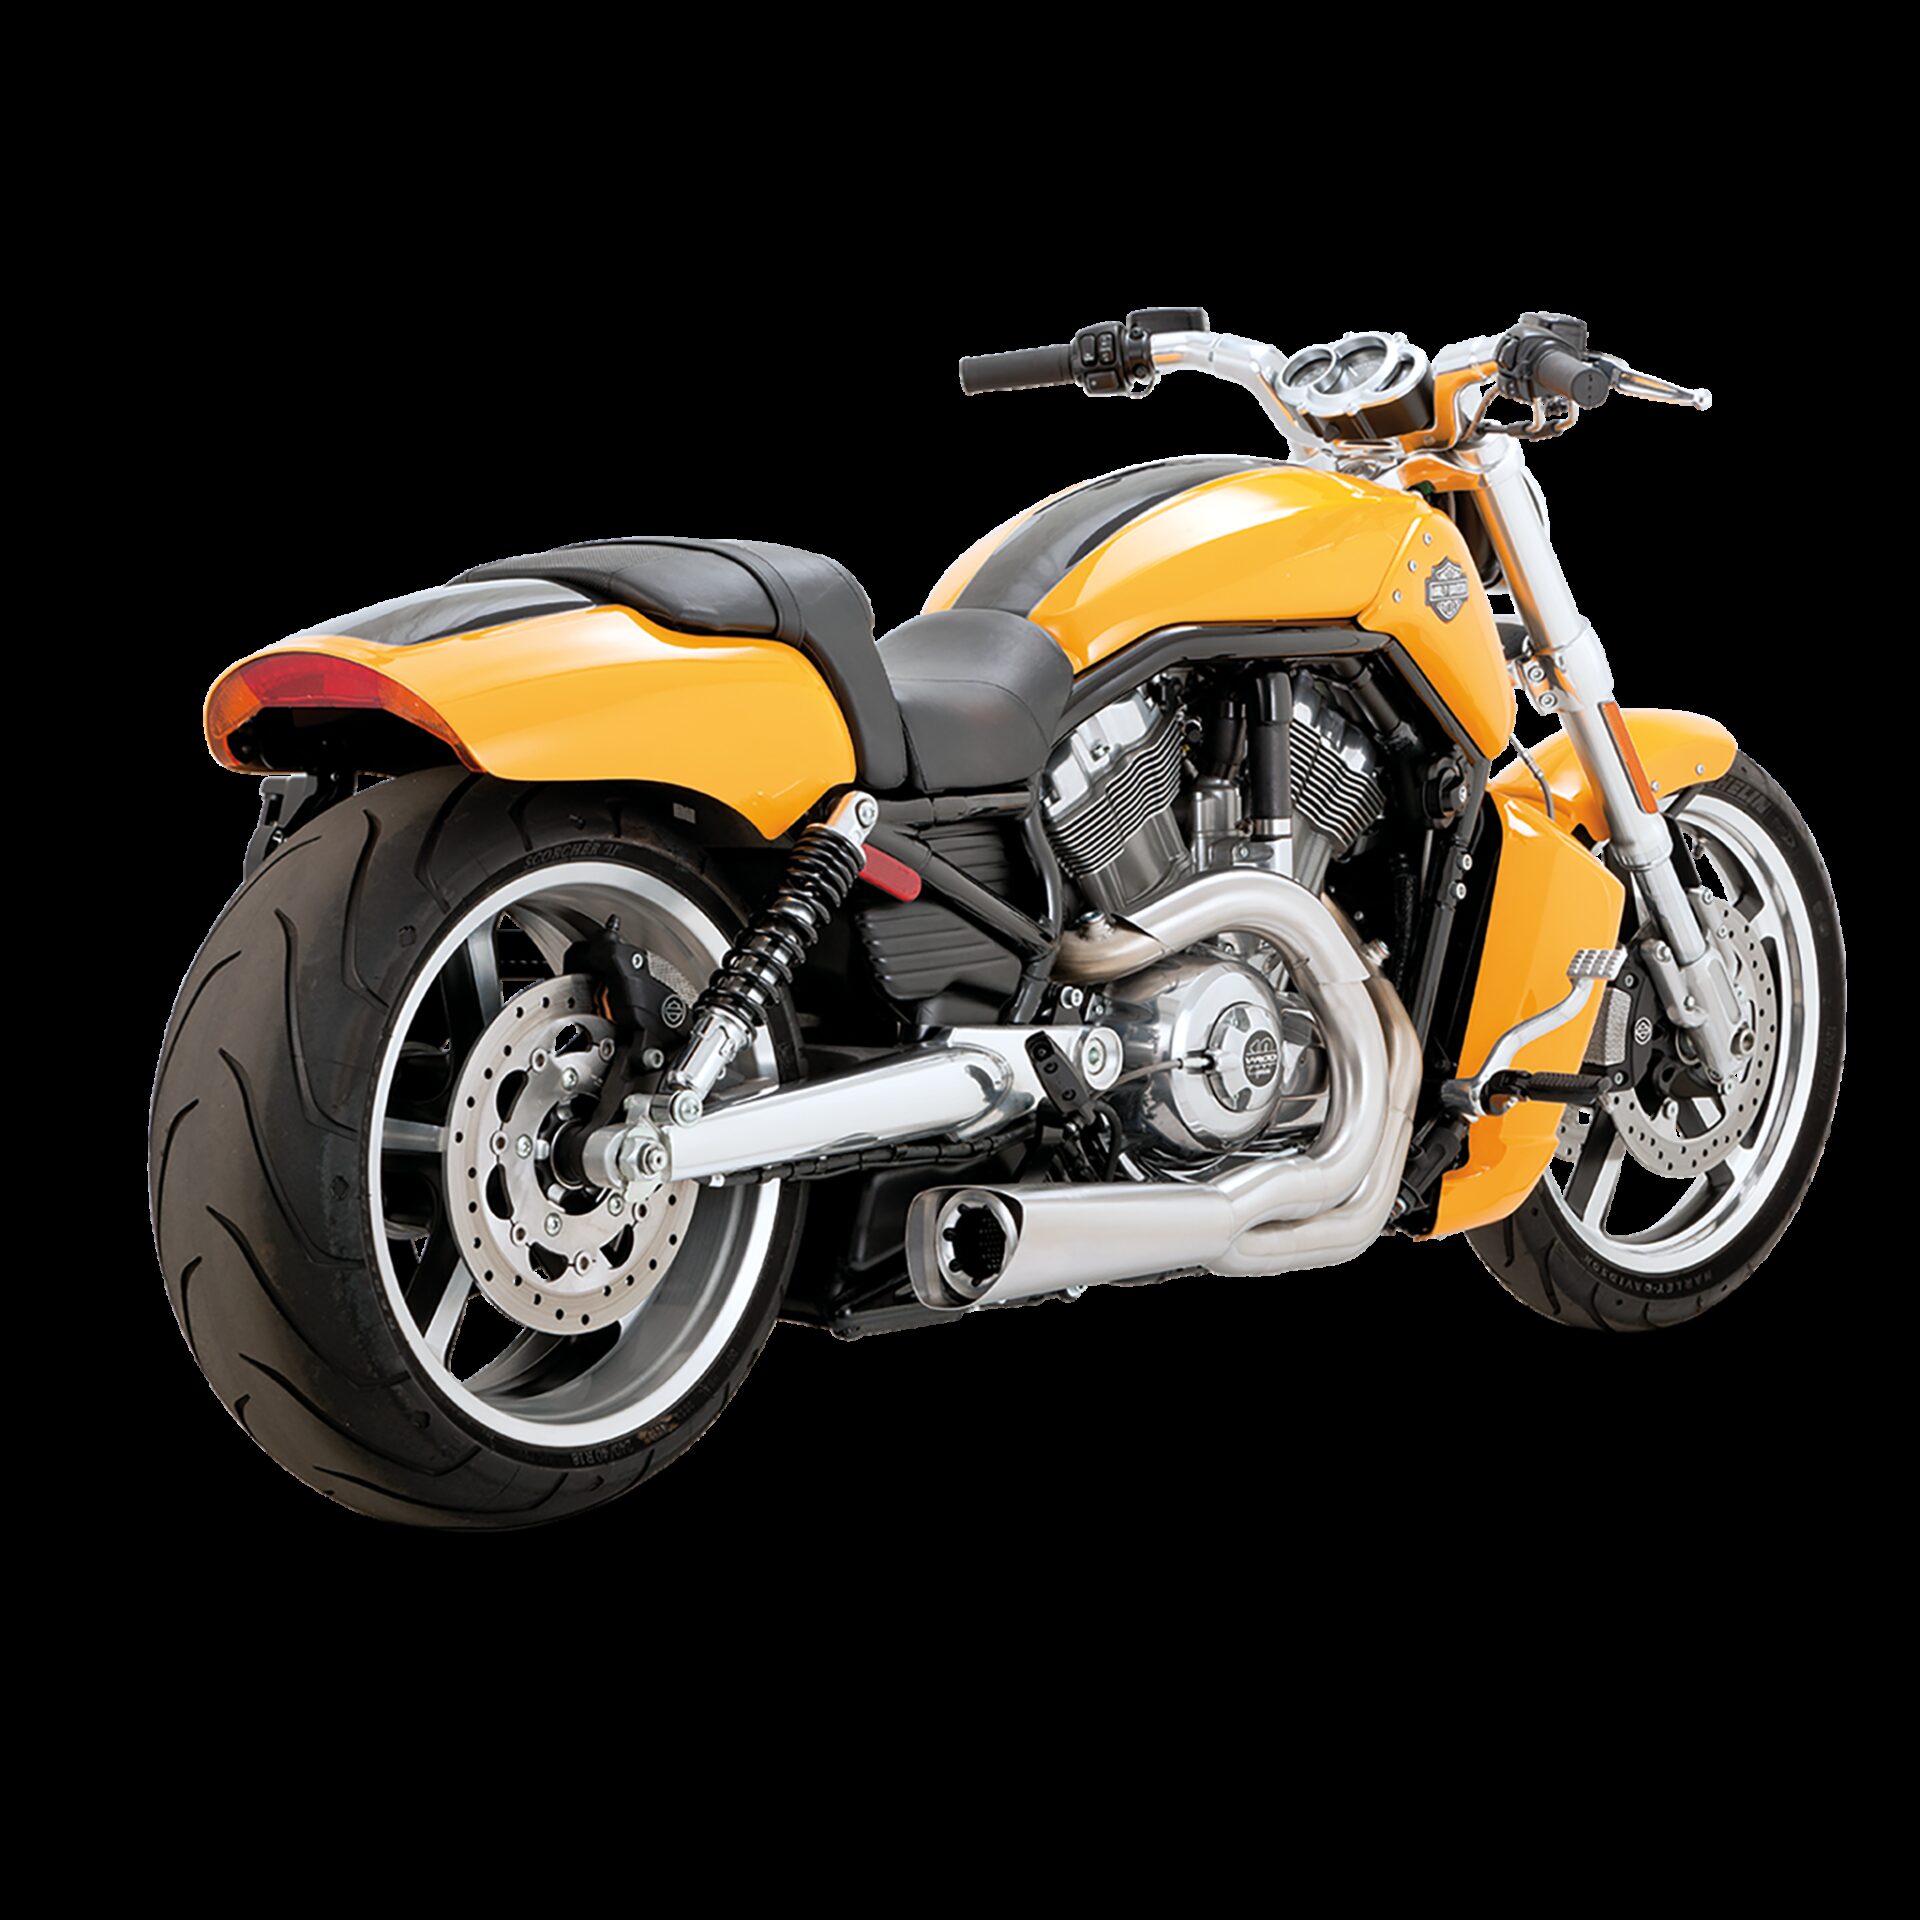 COMPETITION SERIES 2-INTO-1 – Vance & Hines